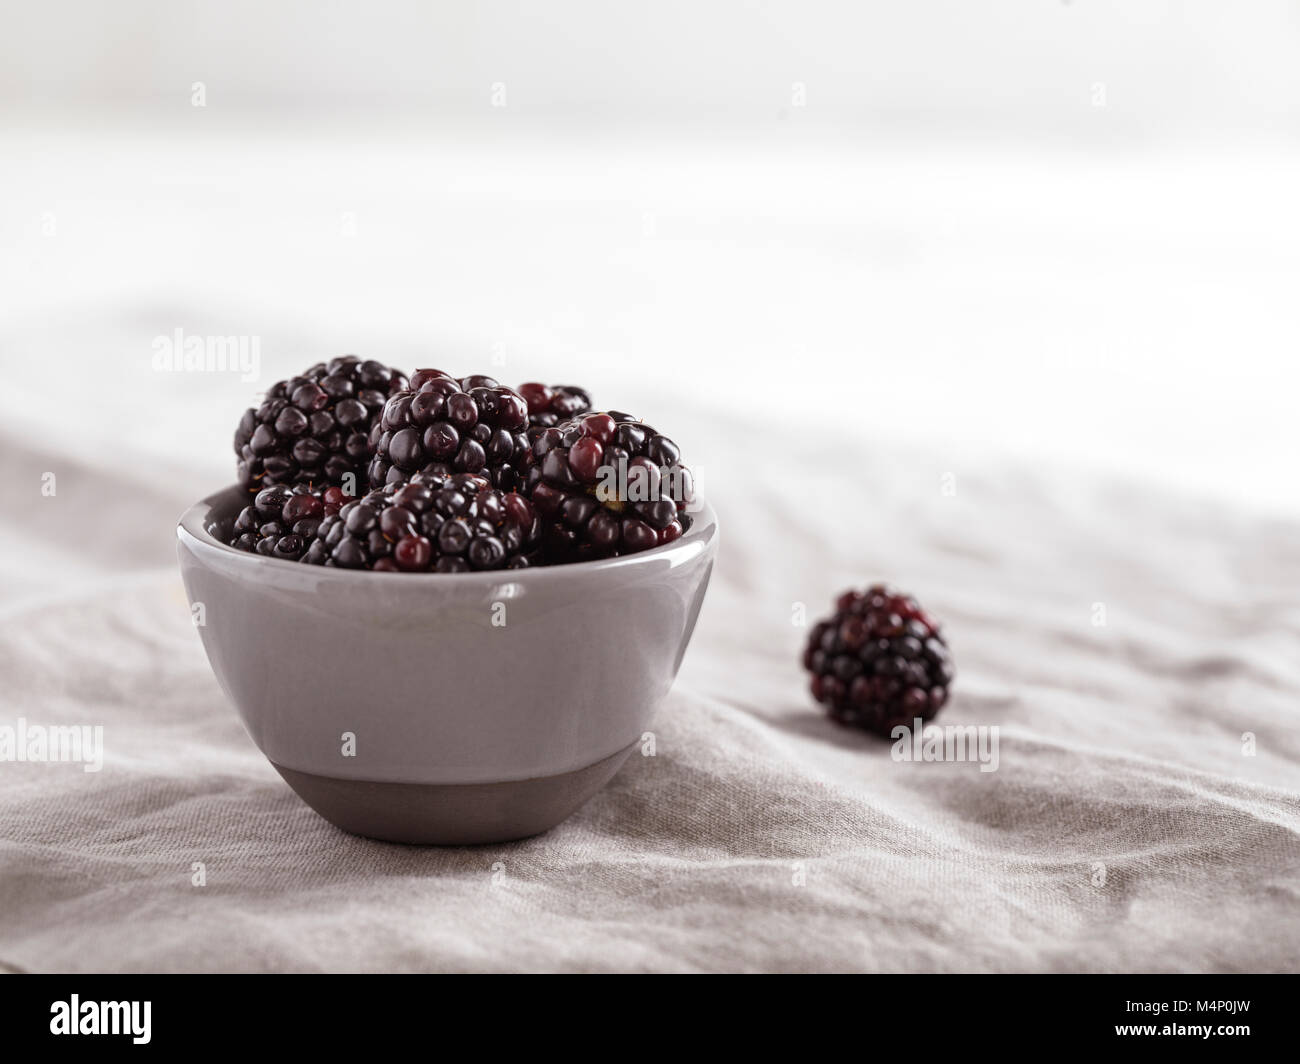 Small, gray bowl filled with fresh blackberries on a gray linen with a bright, airy background. Stock Photo